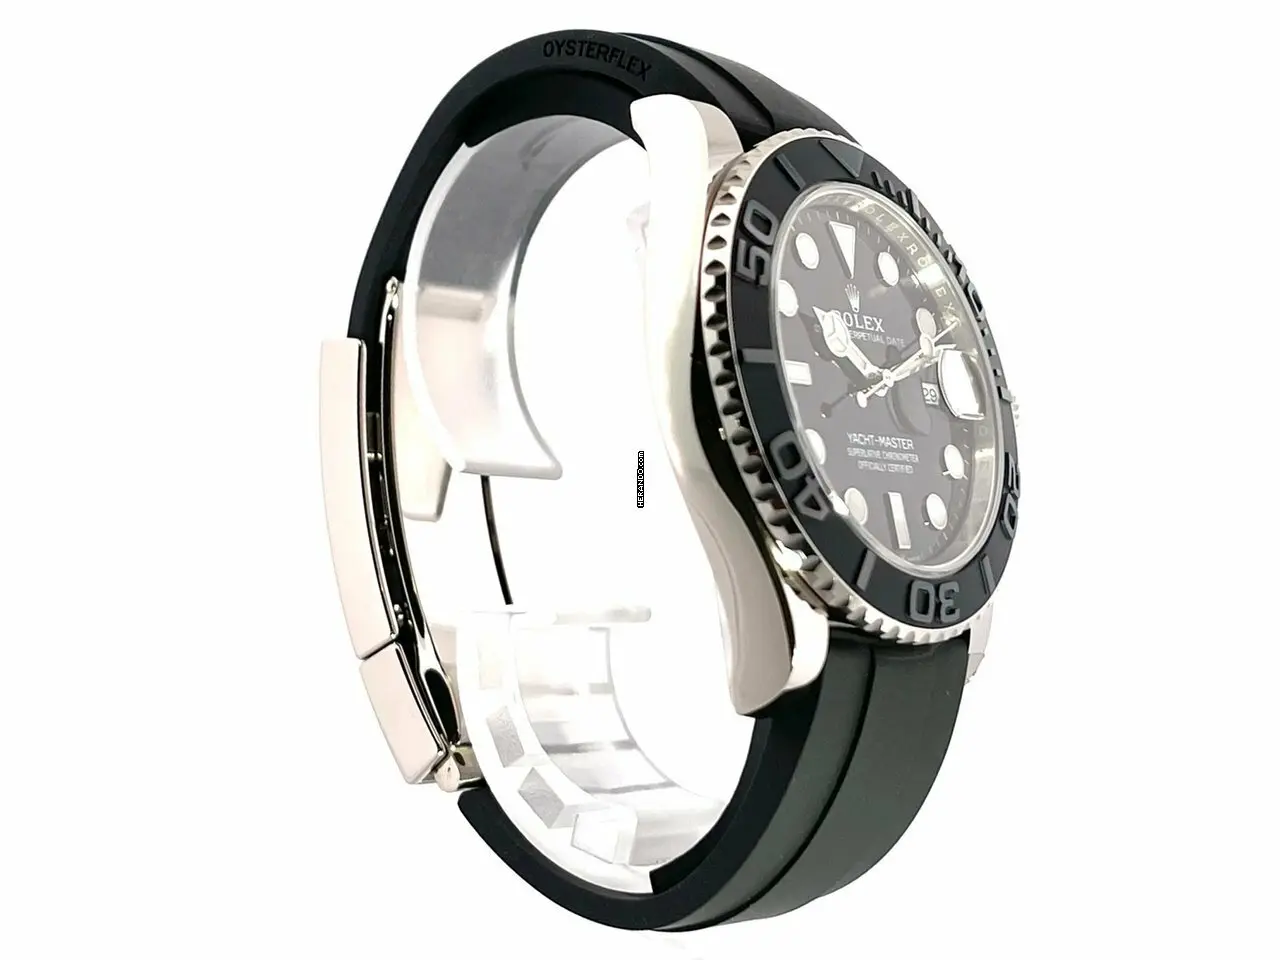 watches-167368-12278278-zx0pmotv69i9oia2ij9jmyw5-ExtraLarge.webp